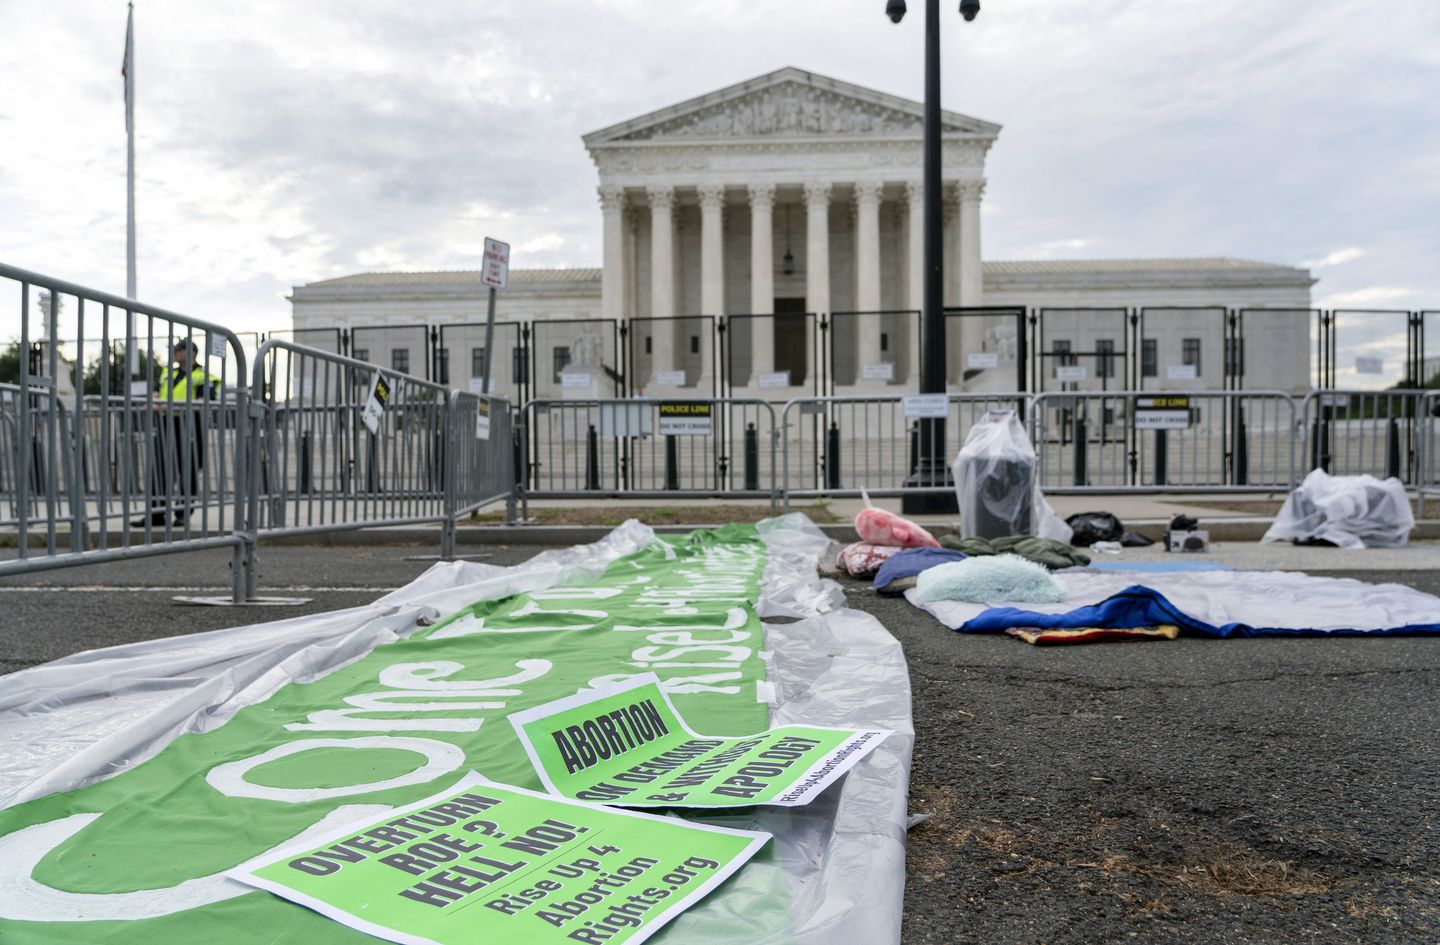 U.S. braces for violence against conservatives, pro-life groups with Supreme Court's abortion ruling